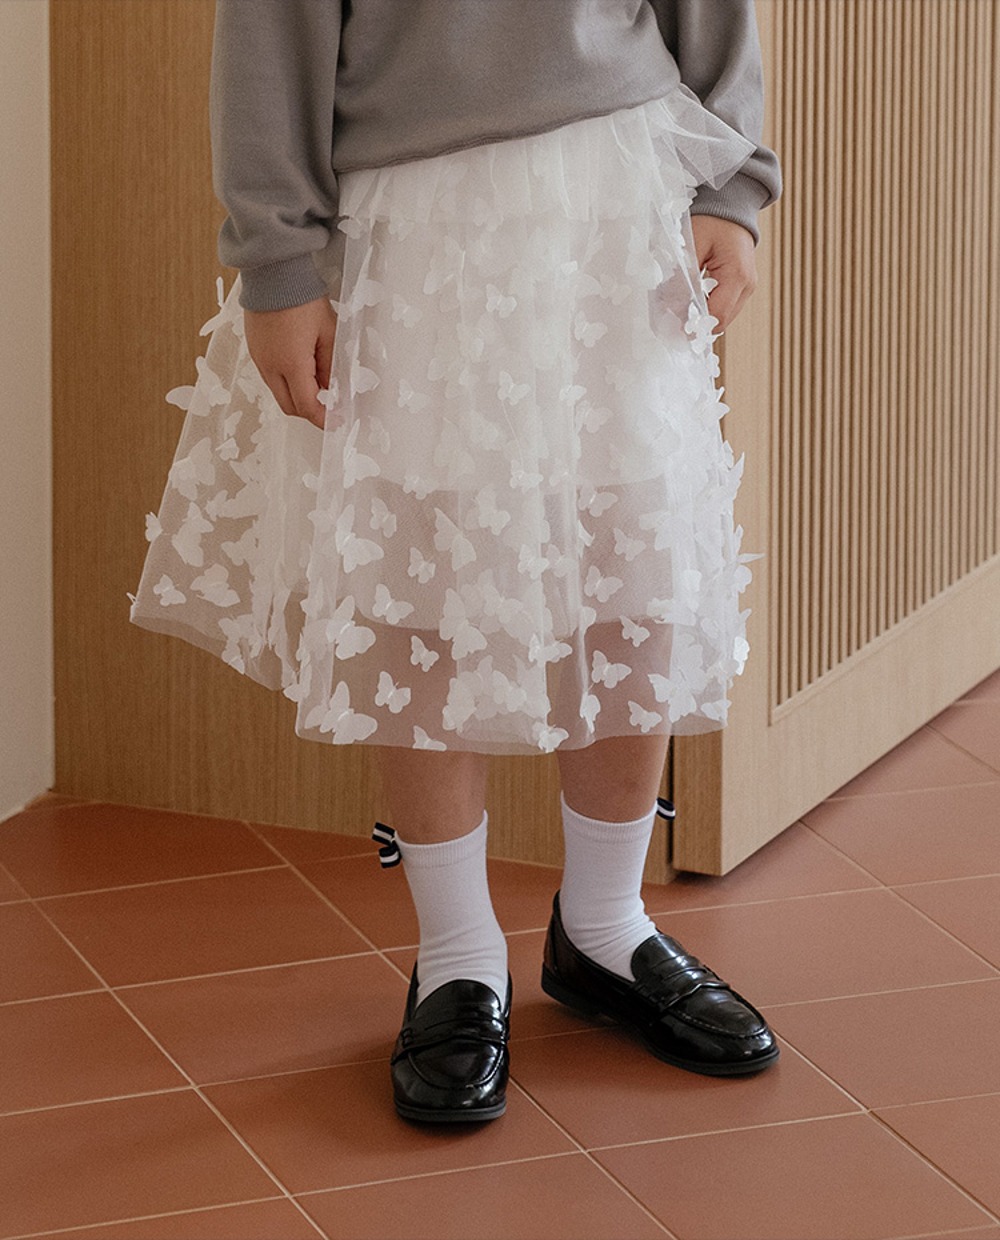 [KIDS] Orchid lace skirt